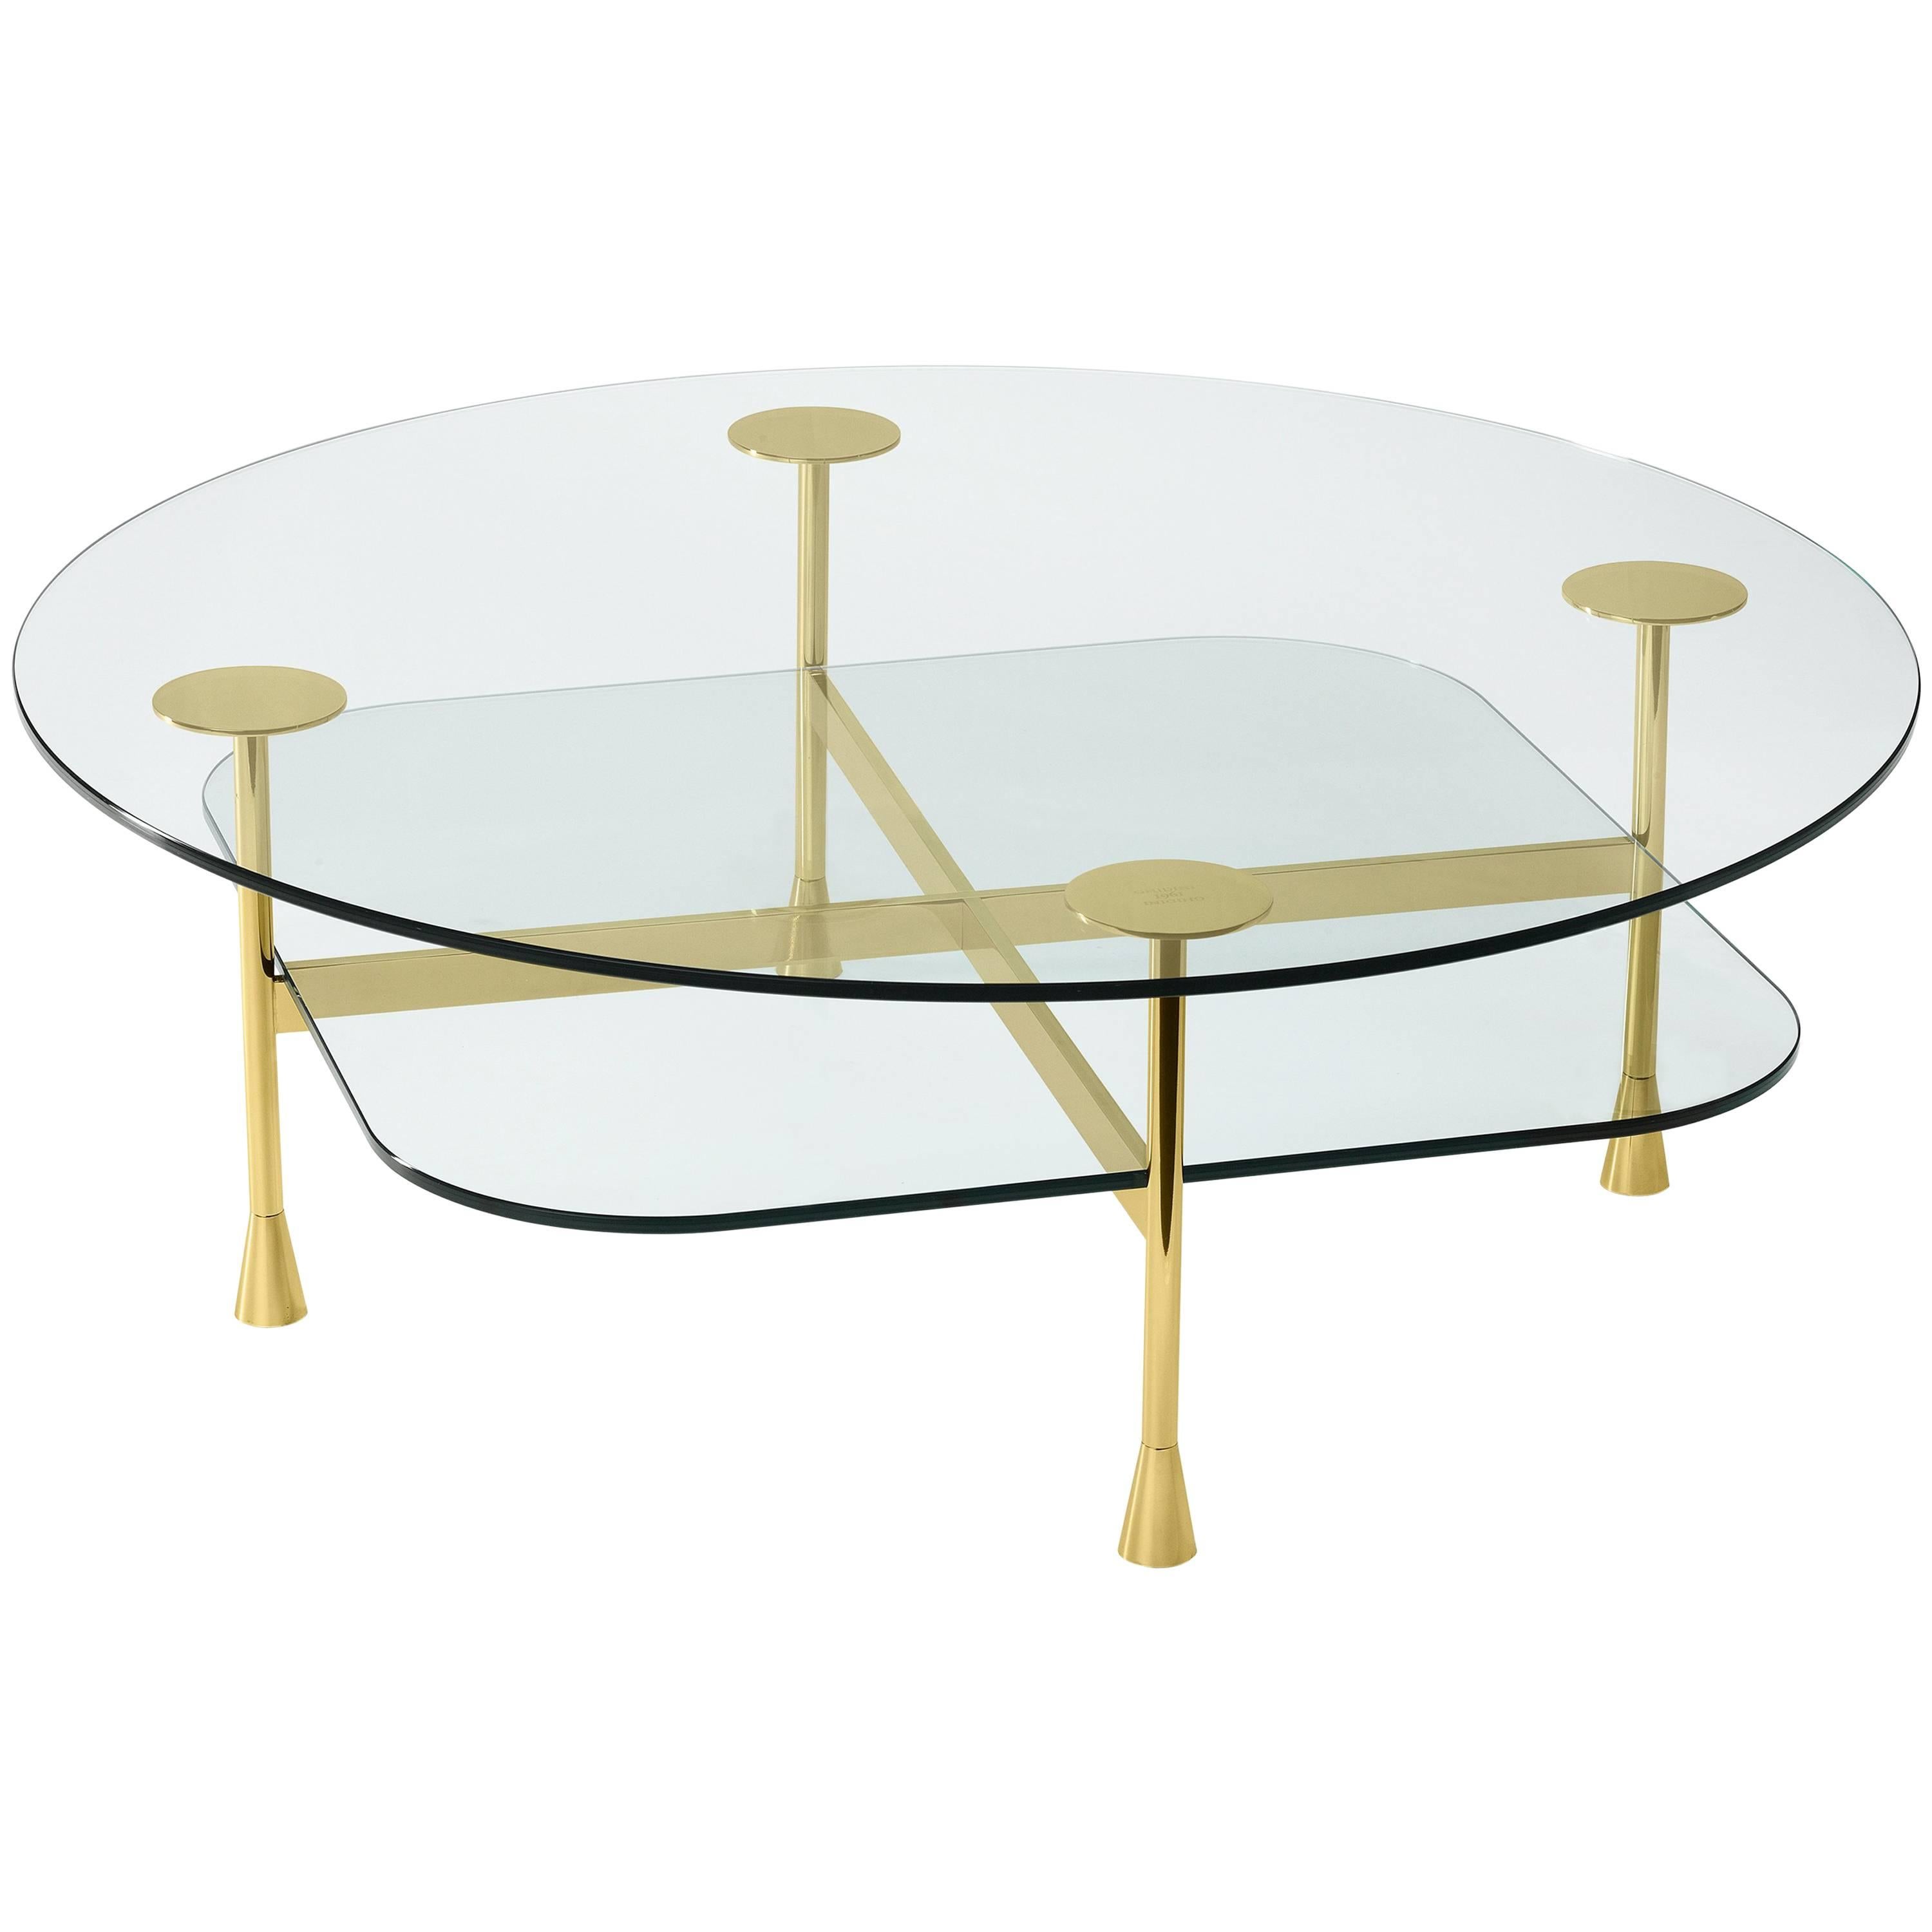 Ghidini 1961 Da Vinci Round Table in Glass and Polished Brass